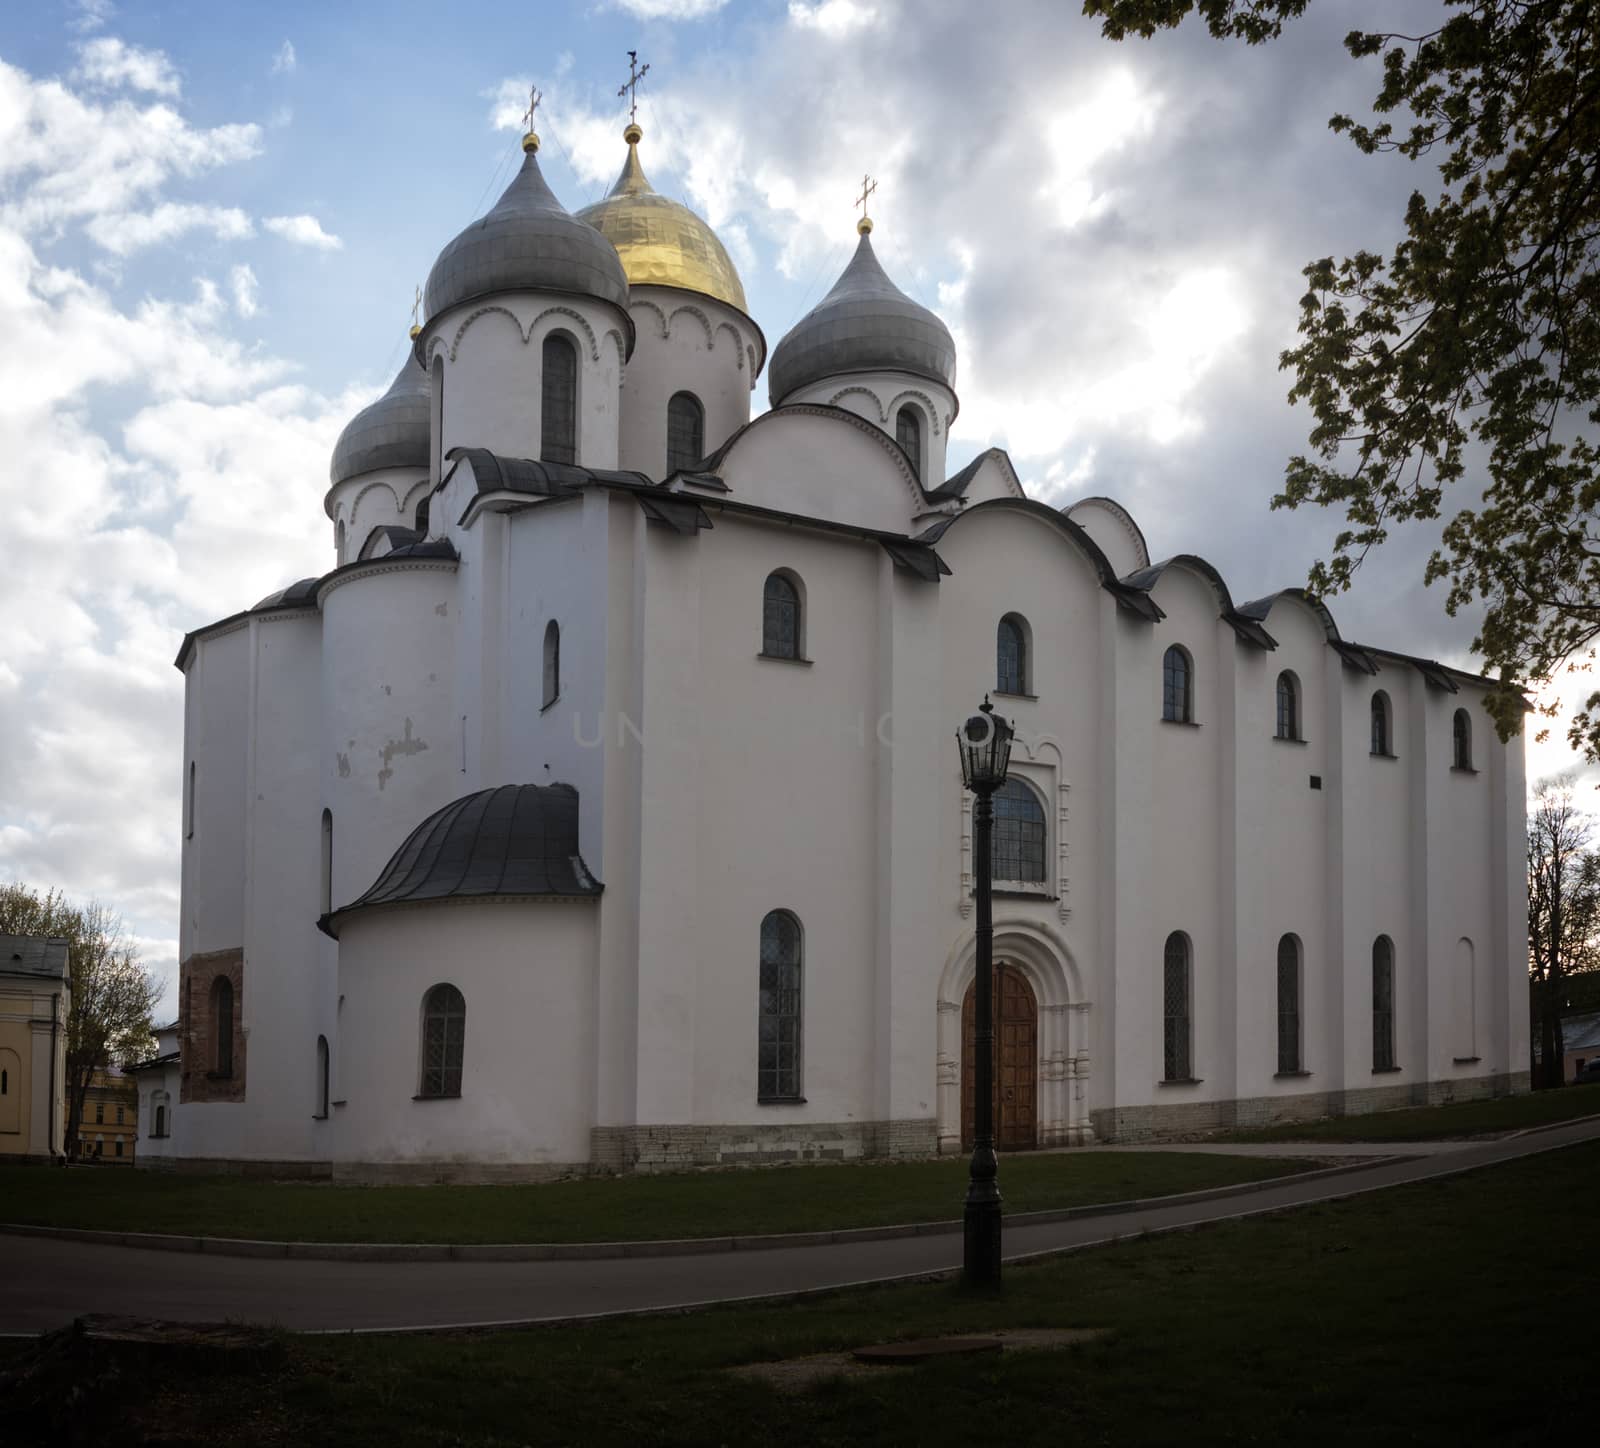 St Sophia's Cathedral by snafu